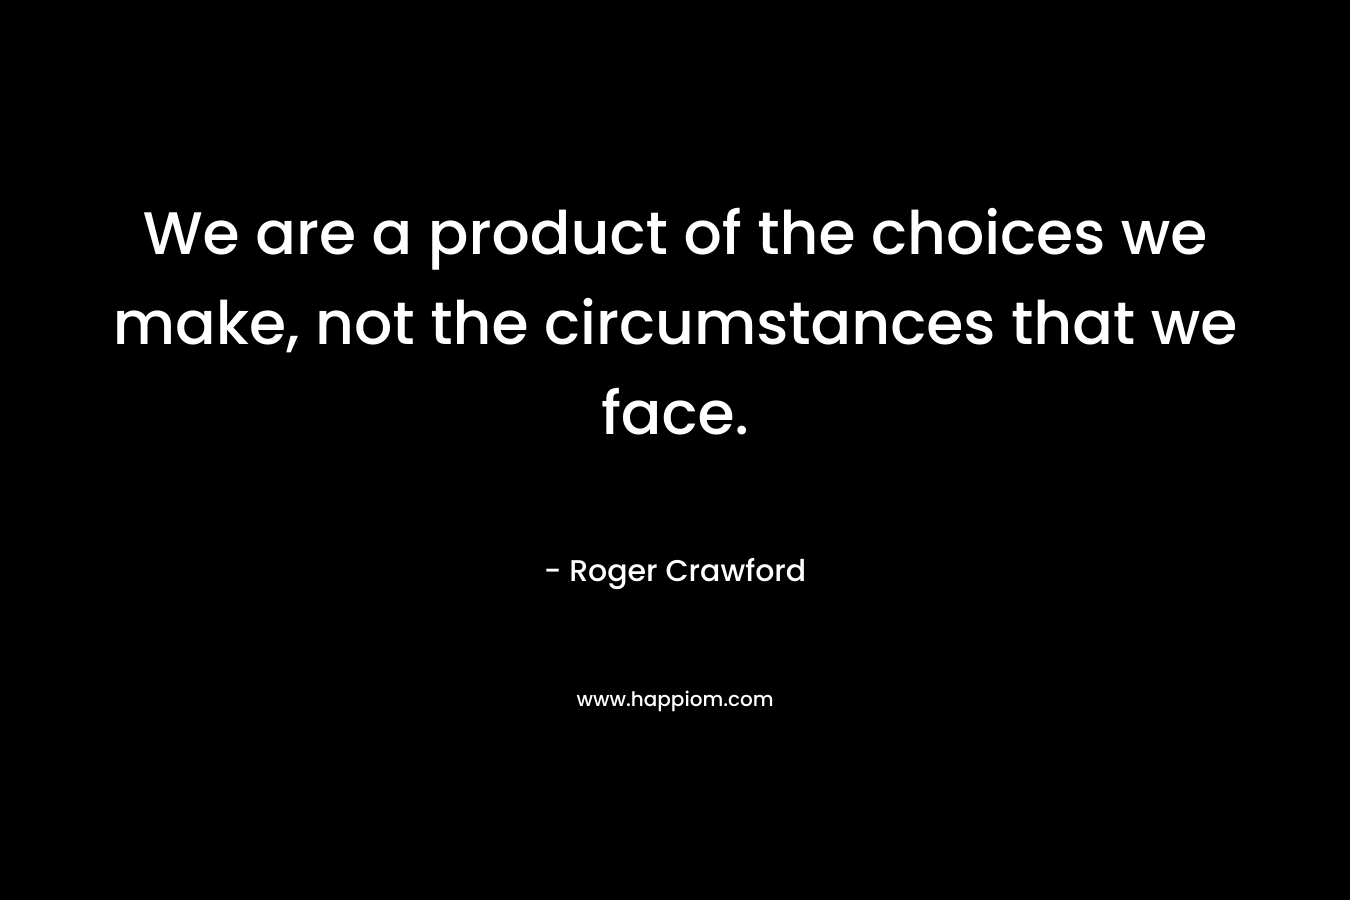 We are a product of the choices we make, not the circumstances that we face.